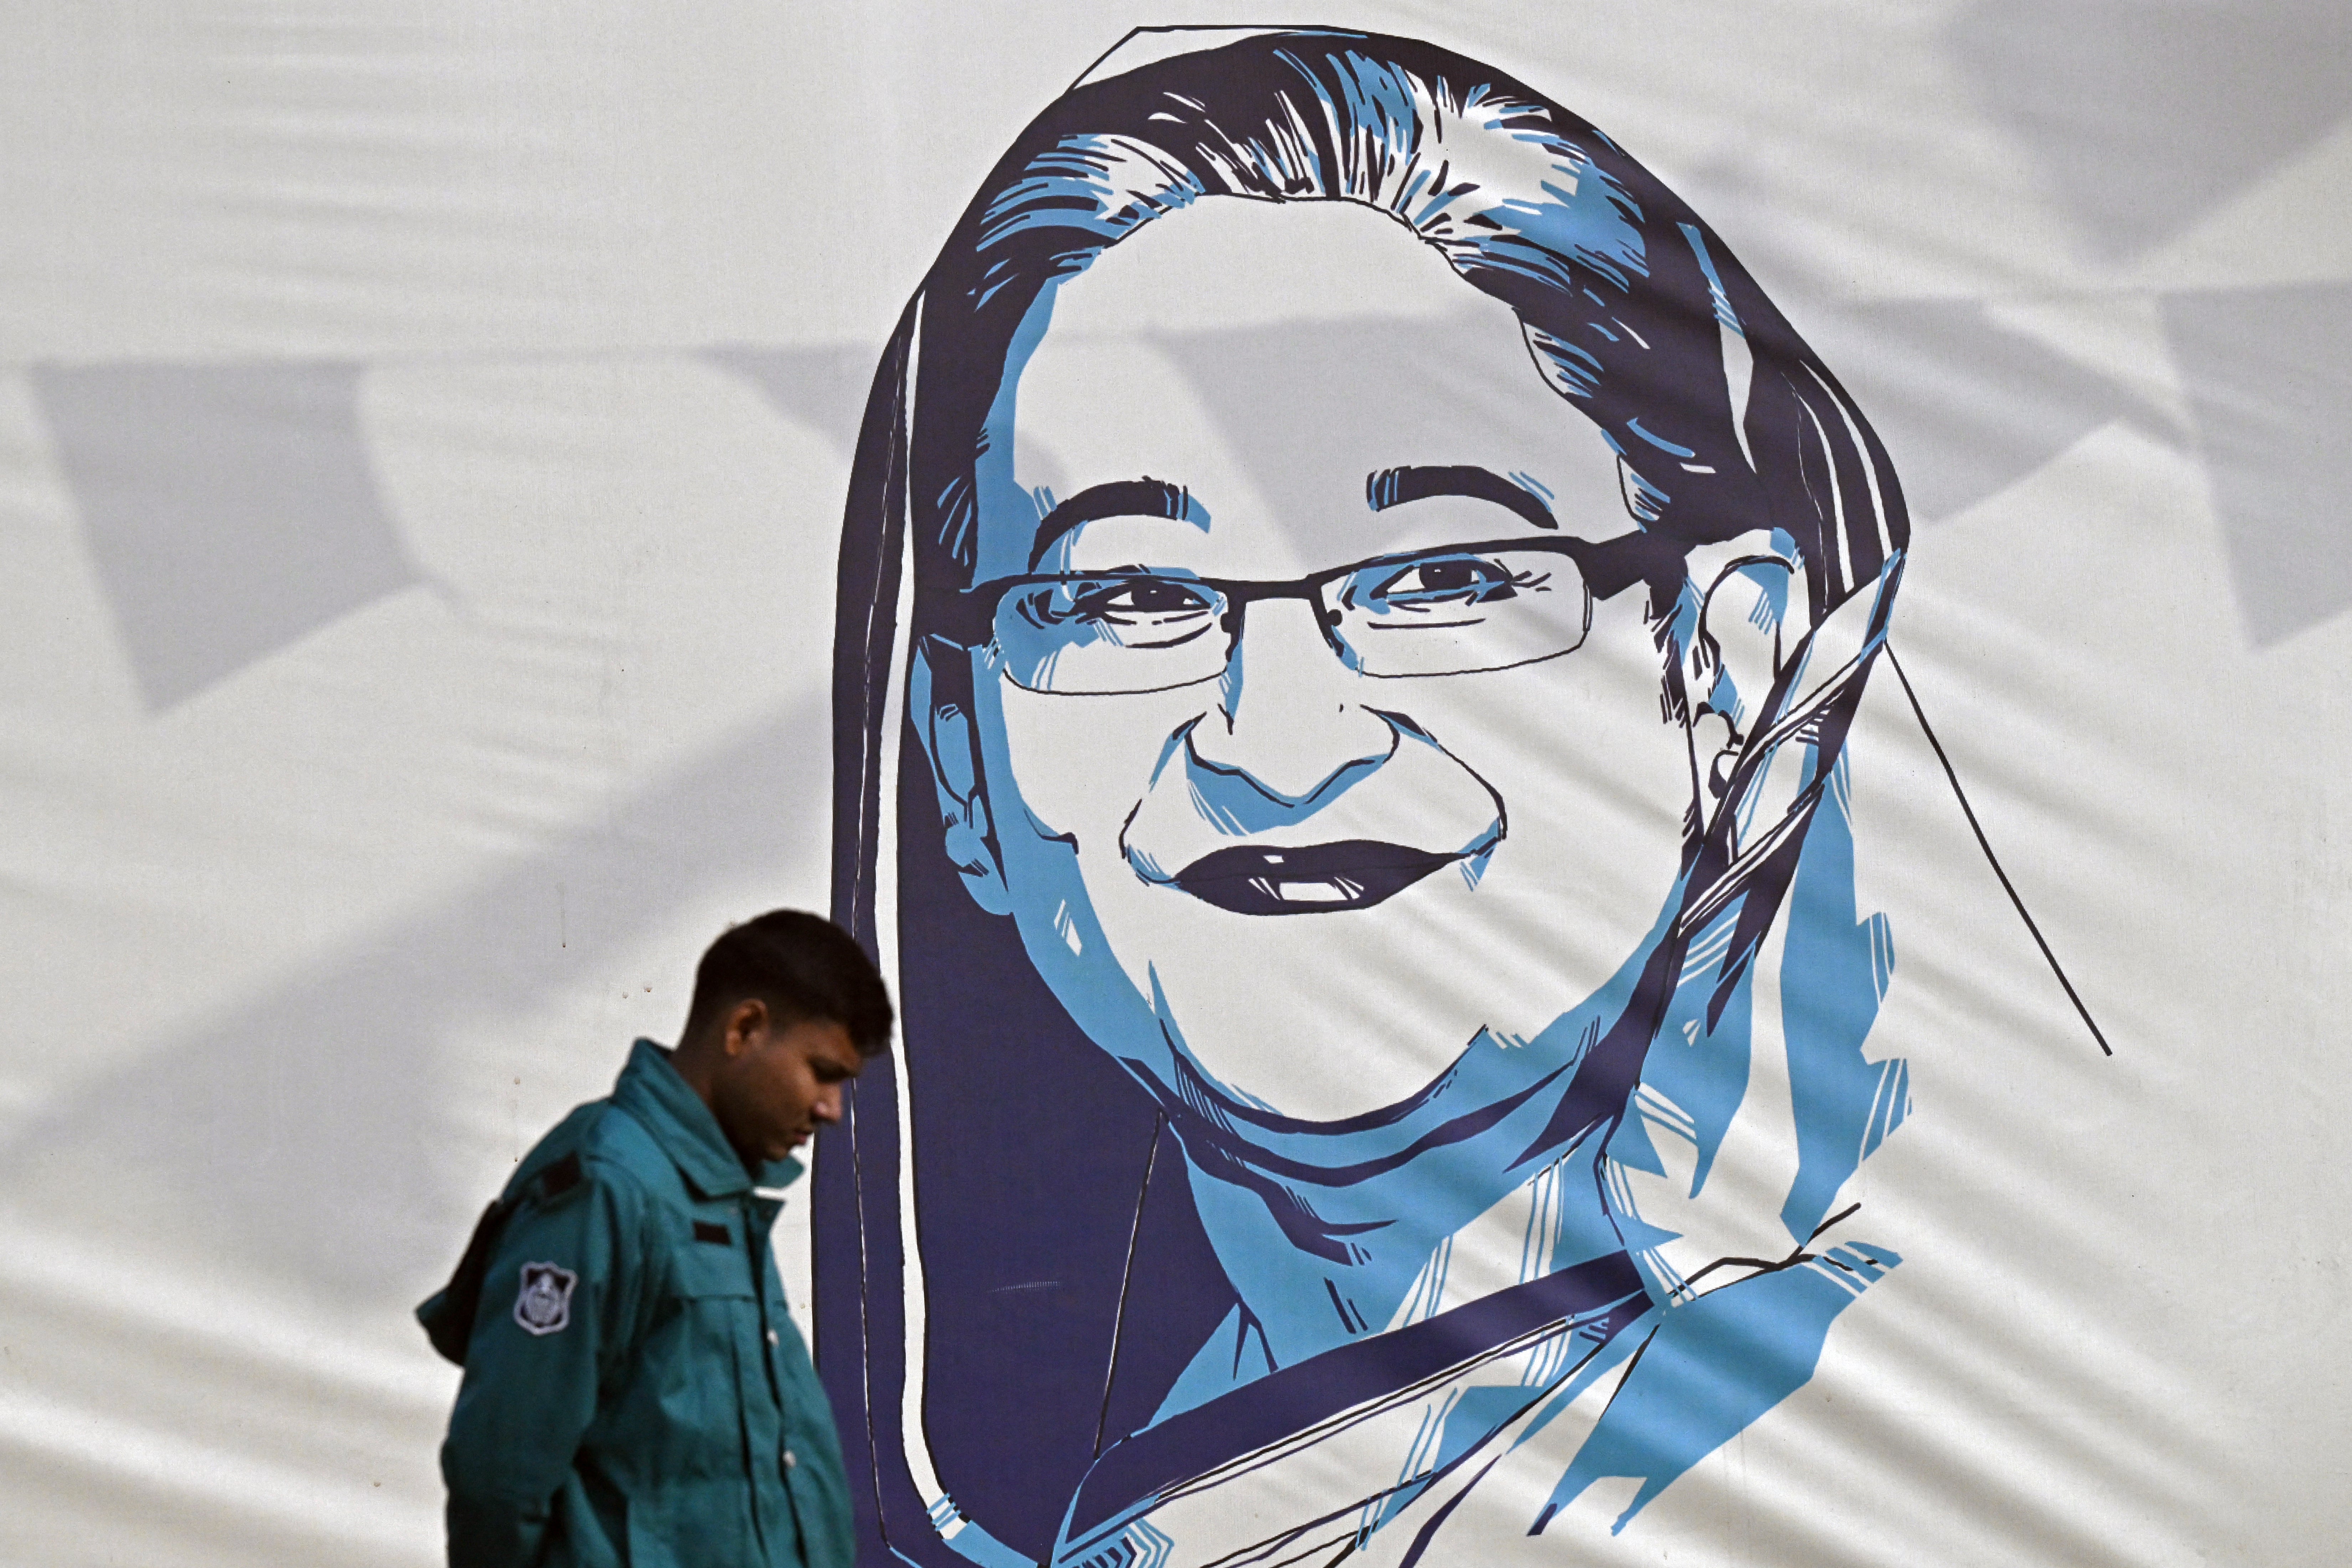 A policeman walks past a portrait of Bangladesh's Prime Minister Sheikh Hasina, in Dhaka